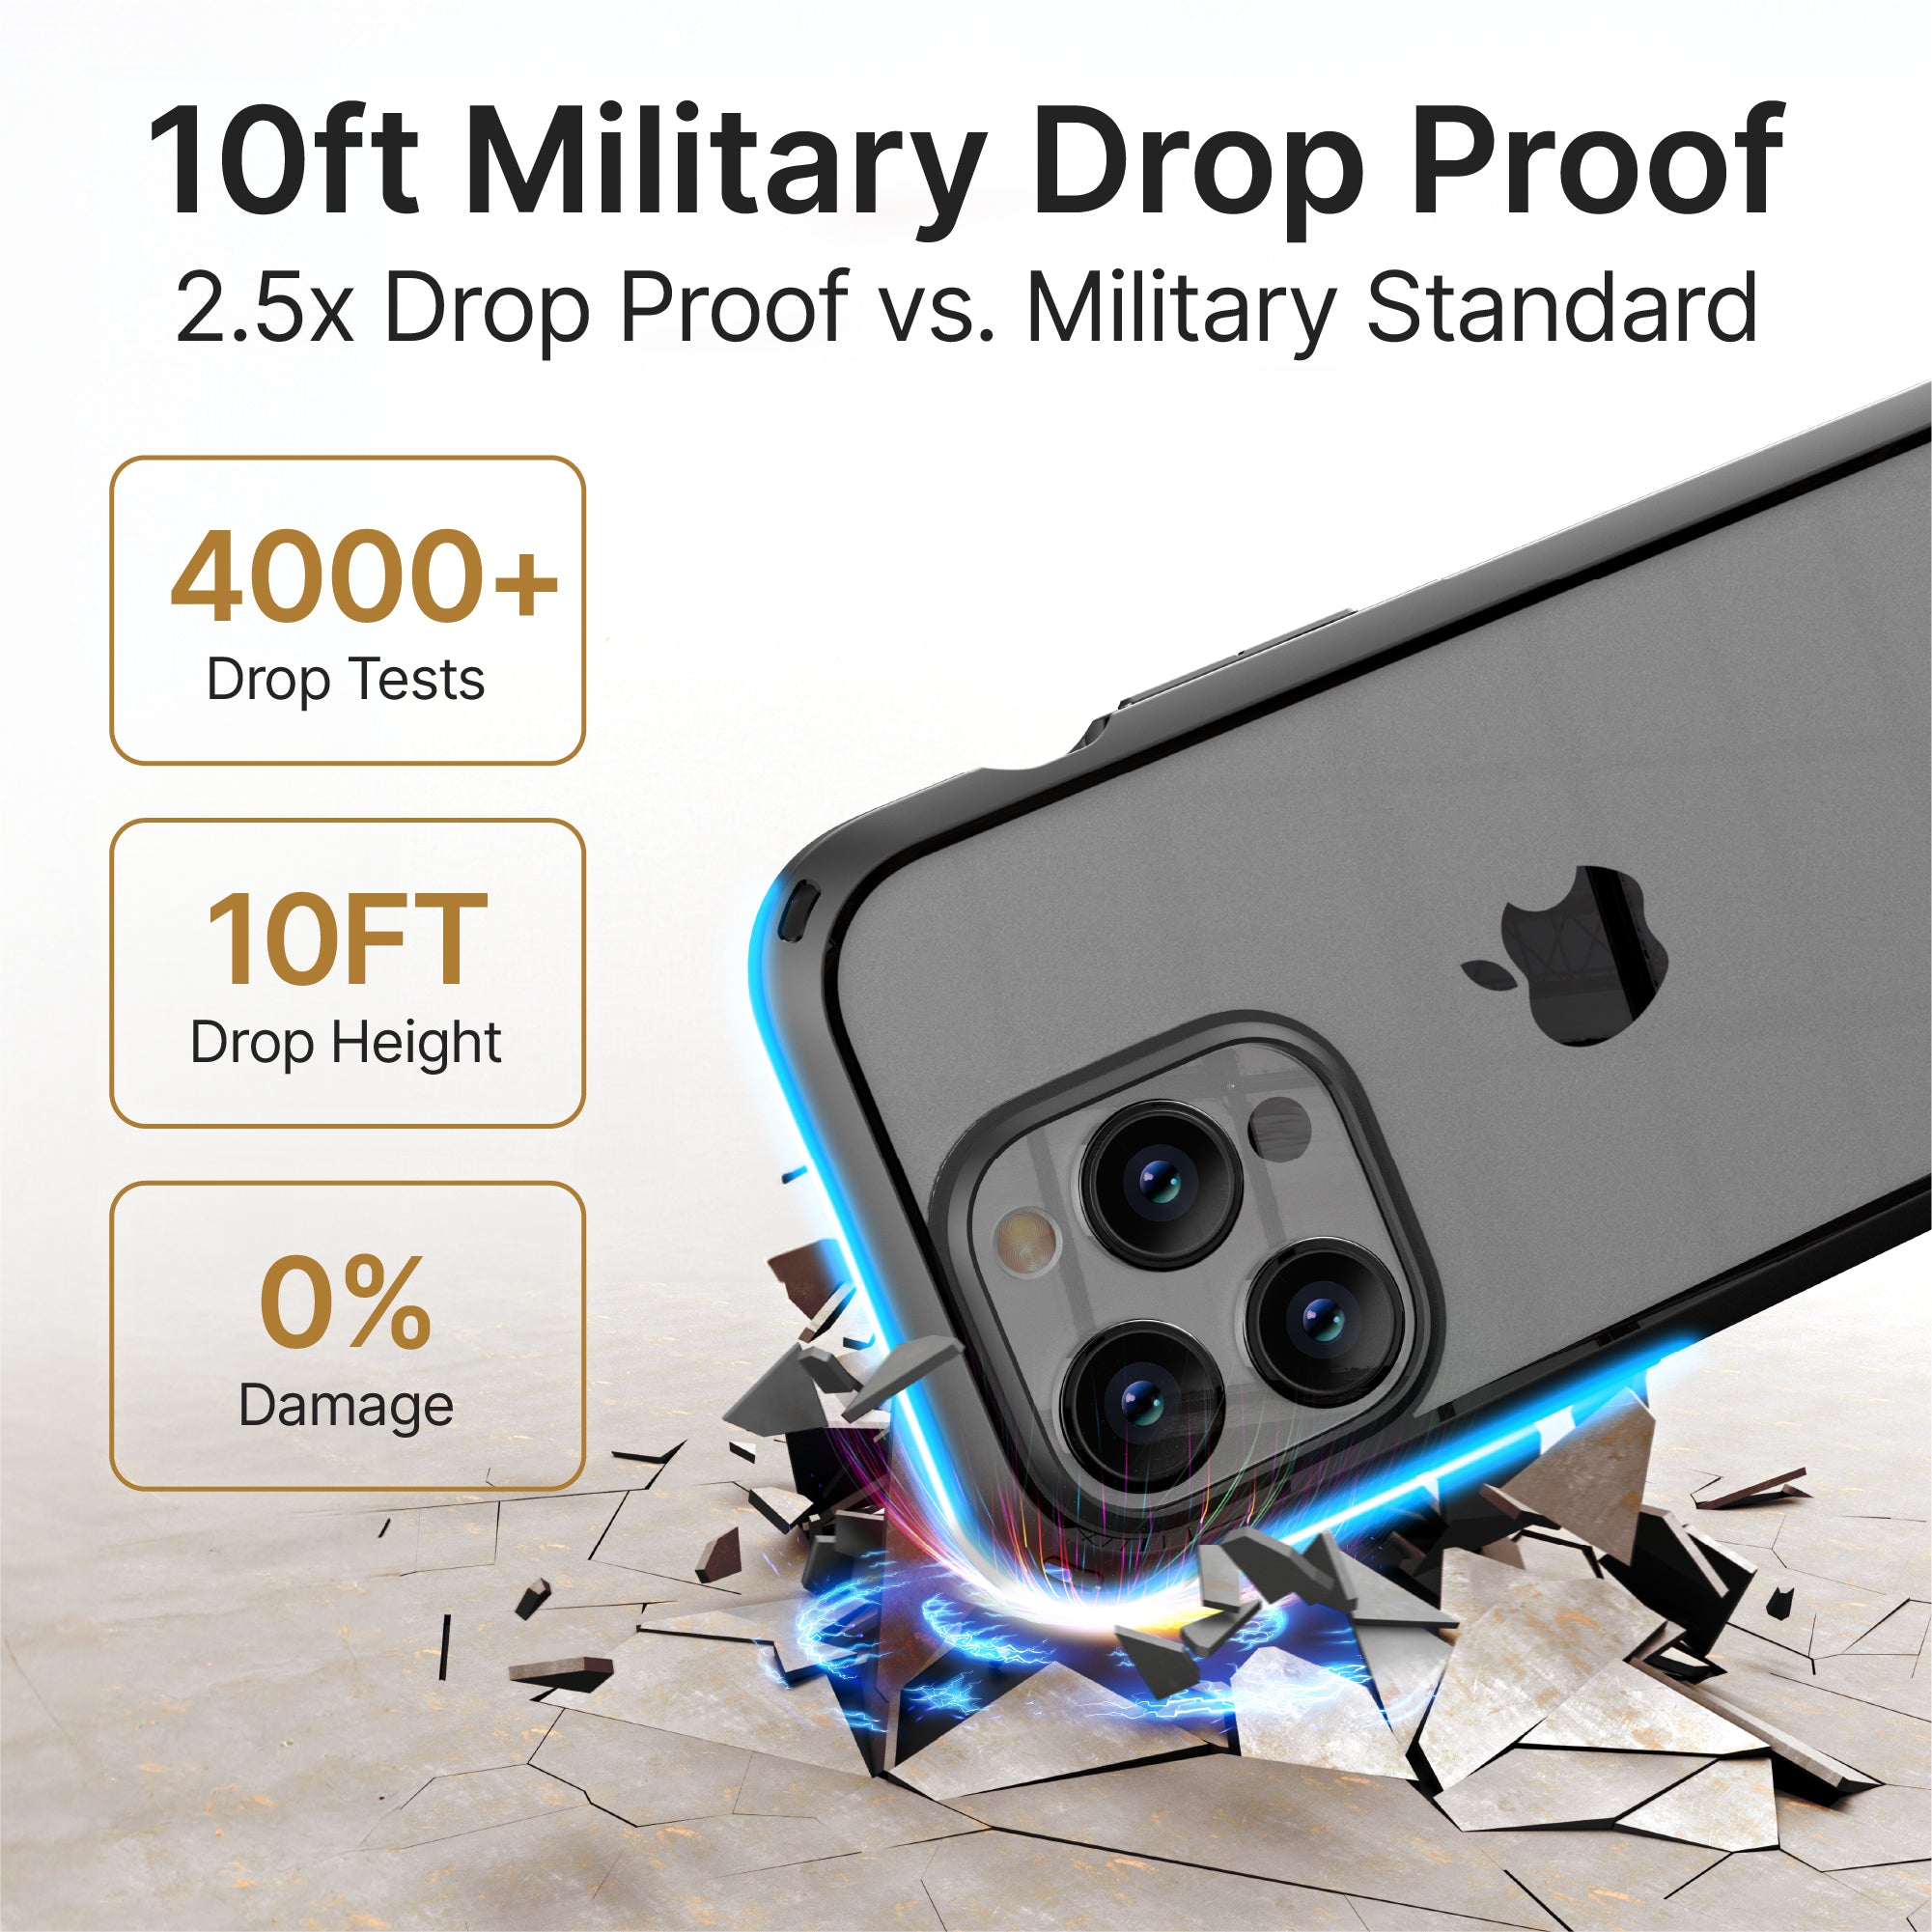 Catalyst iphone 15 series influence case iphone 15 pro in midnight black colorway showing the durability of the case text reads 10ft military drop proof 2.5 x drop proof vs. military standard 4000+ drop tests 10ft drop height 0% damage